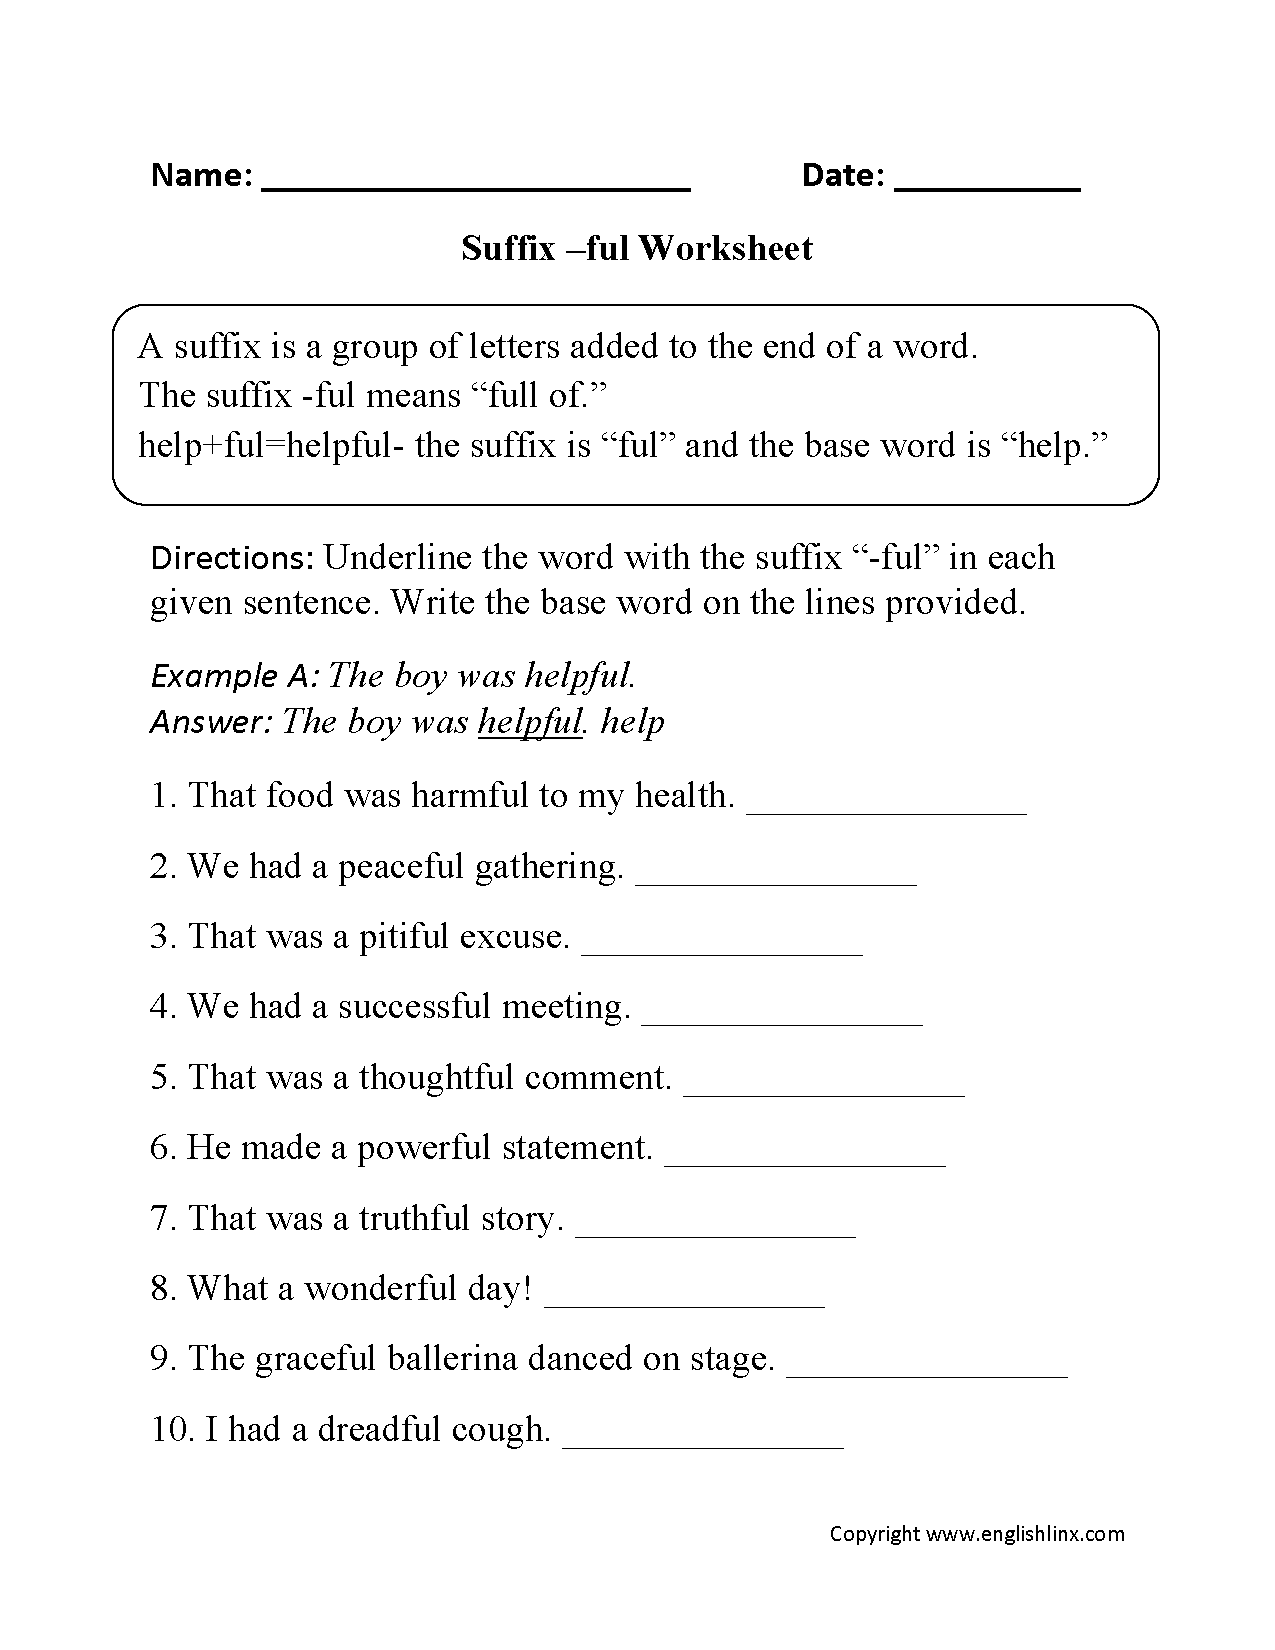 Suffixes -ful Worksheets